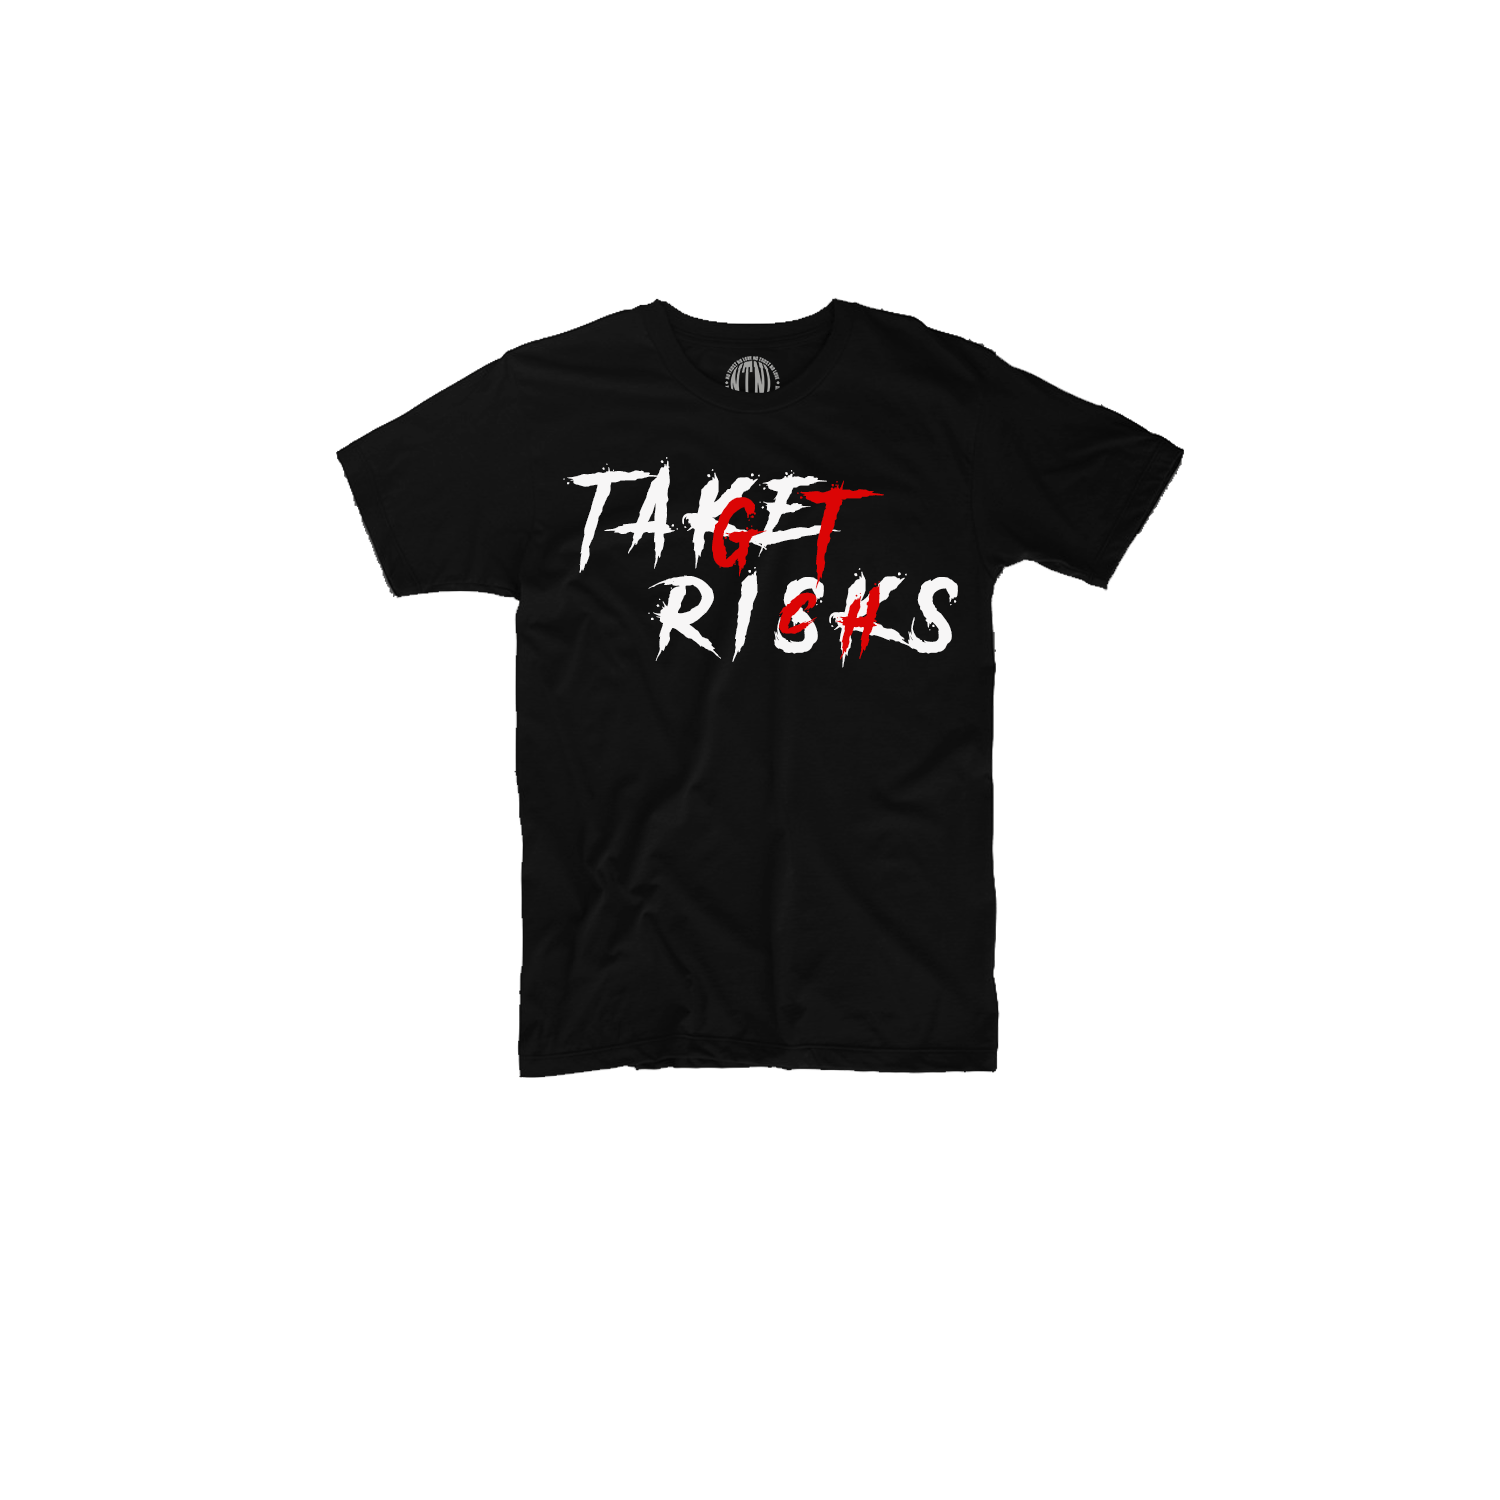 BLACK TSHIRT WITH "TAKE RISK GET RICH" SAYING PRINTED ON FRONT